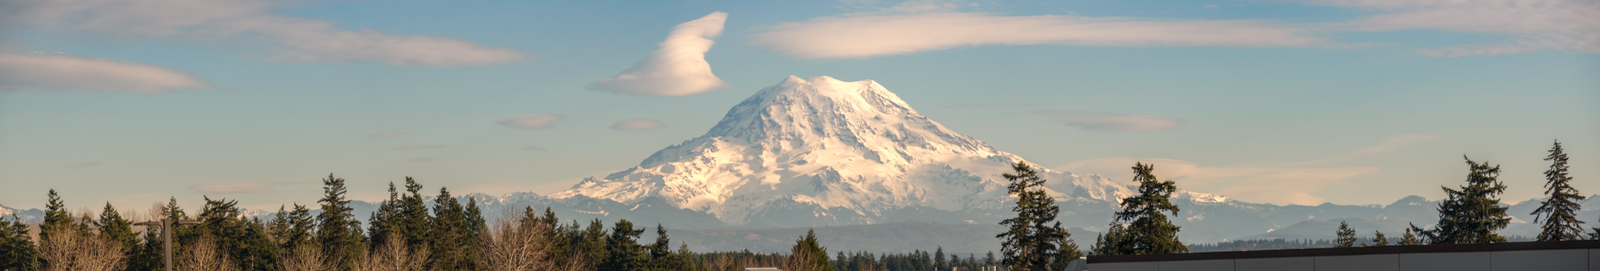 Mt. Rainer, taken from just above the WDS Tacoma facility